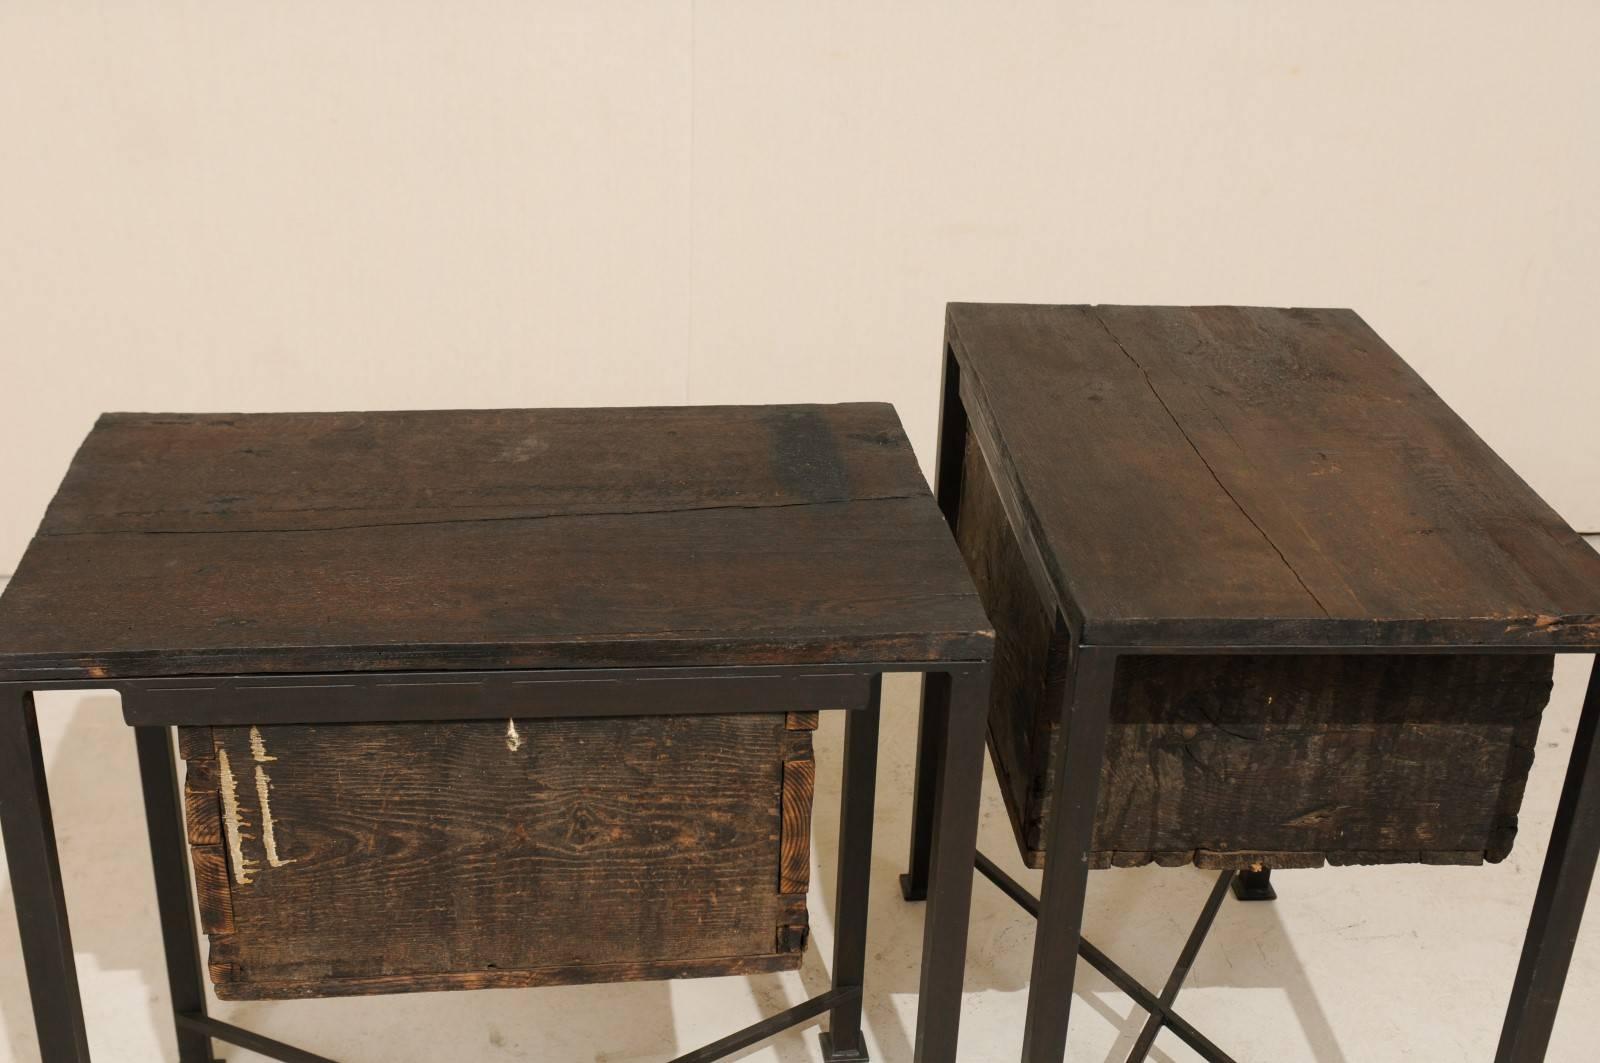 Pair of 18th Century Spanish Wood Chests on Iron Bases with Geometric Carvings 2